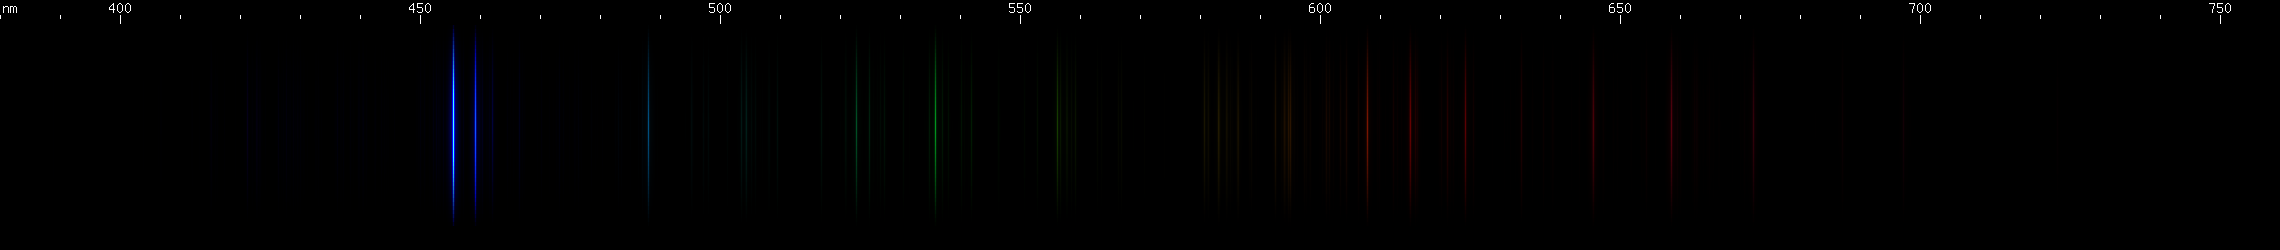 Spectral Lines of Cesium